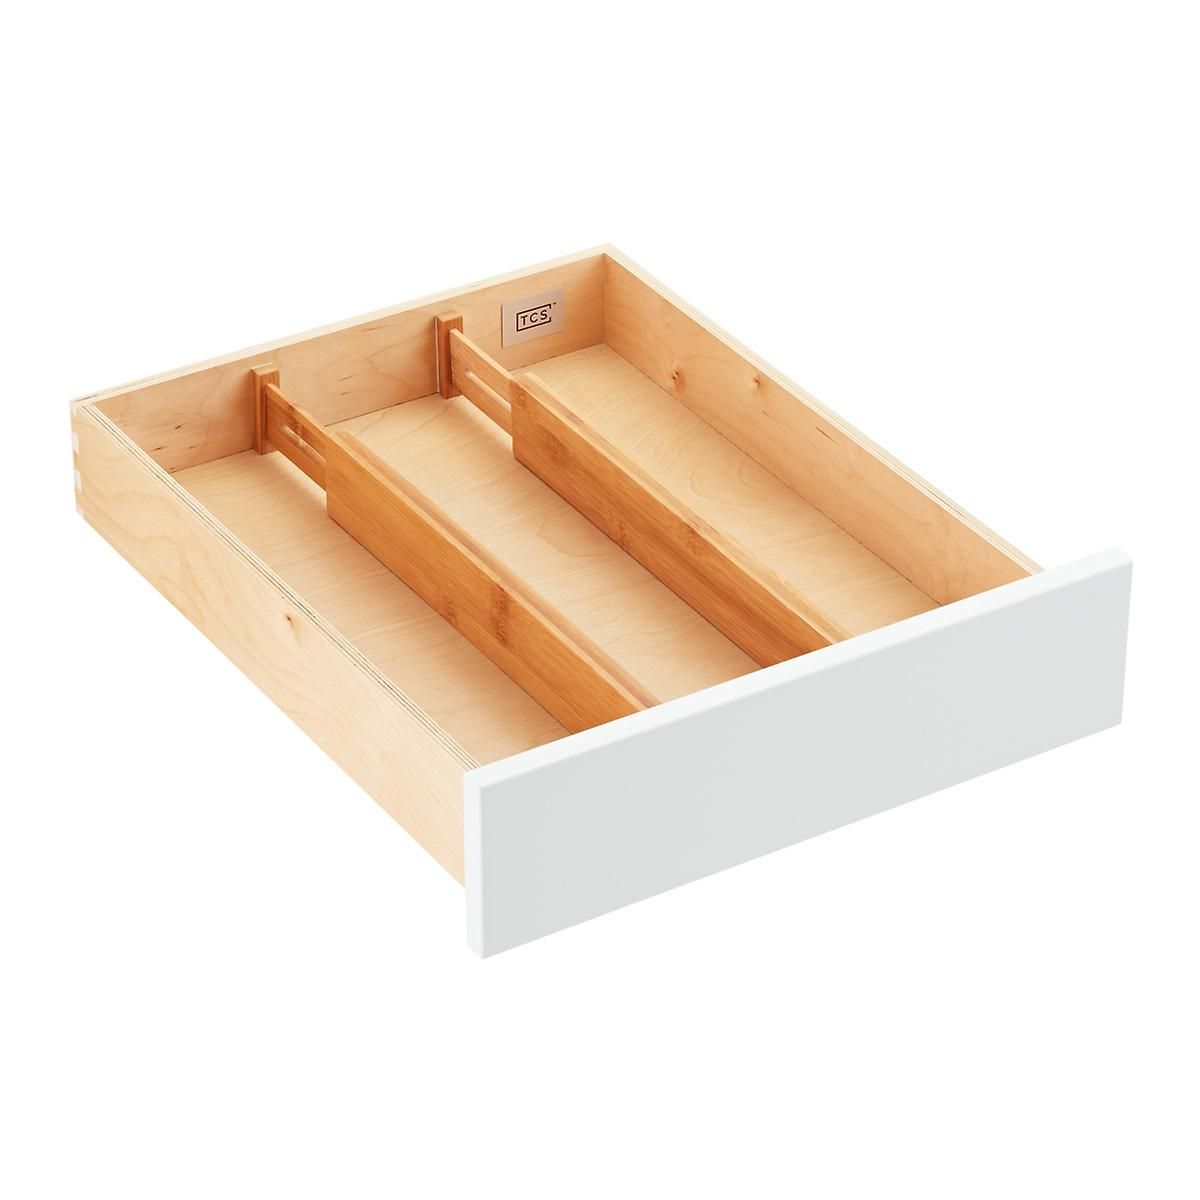 Bamboo Drawer Organizers Pkg/2 | The Container Store